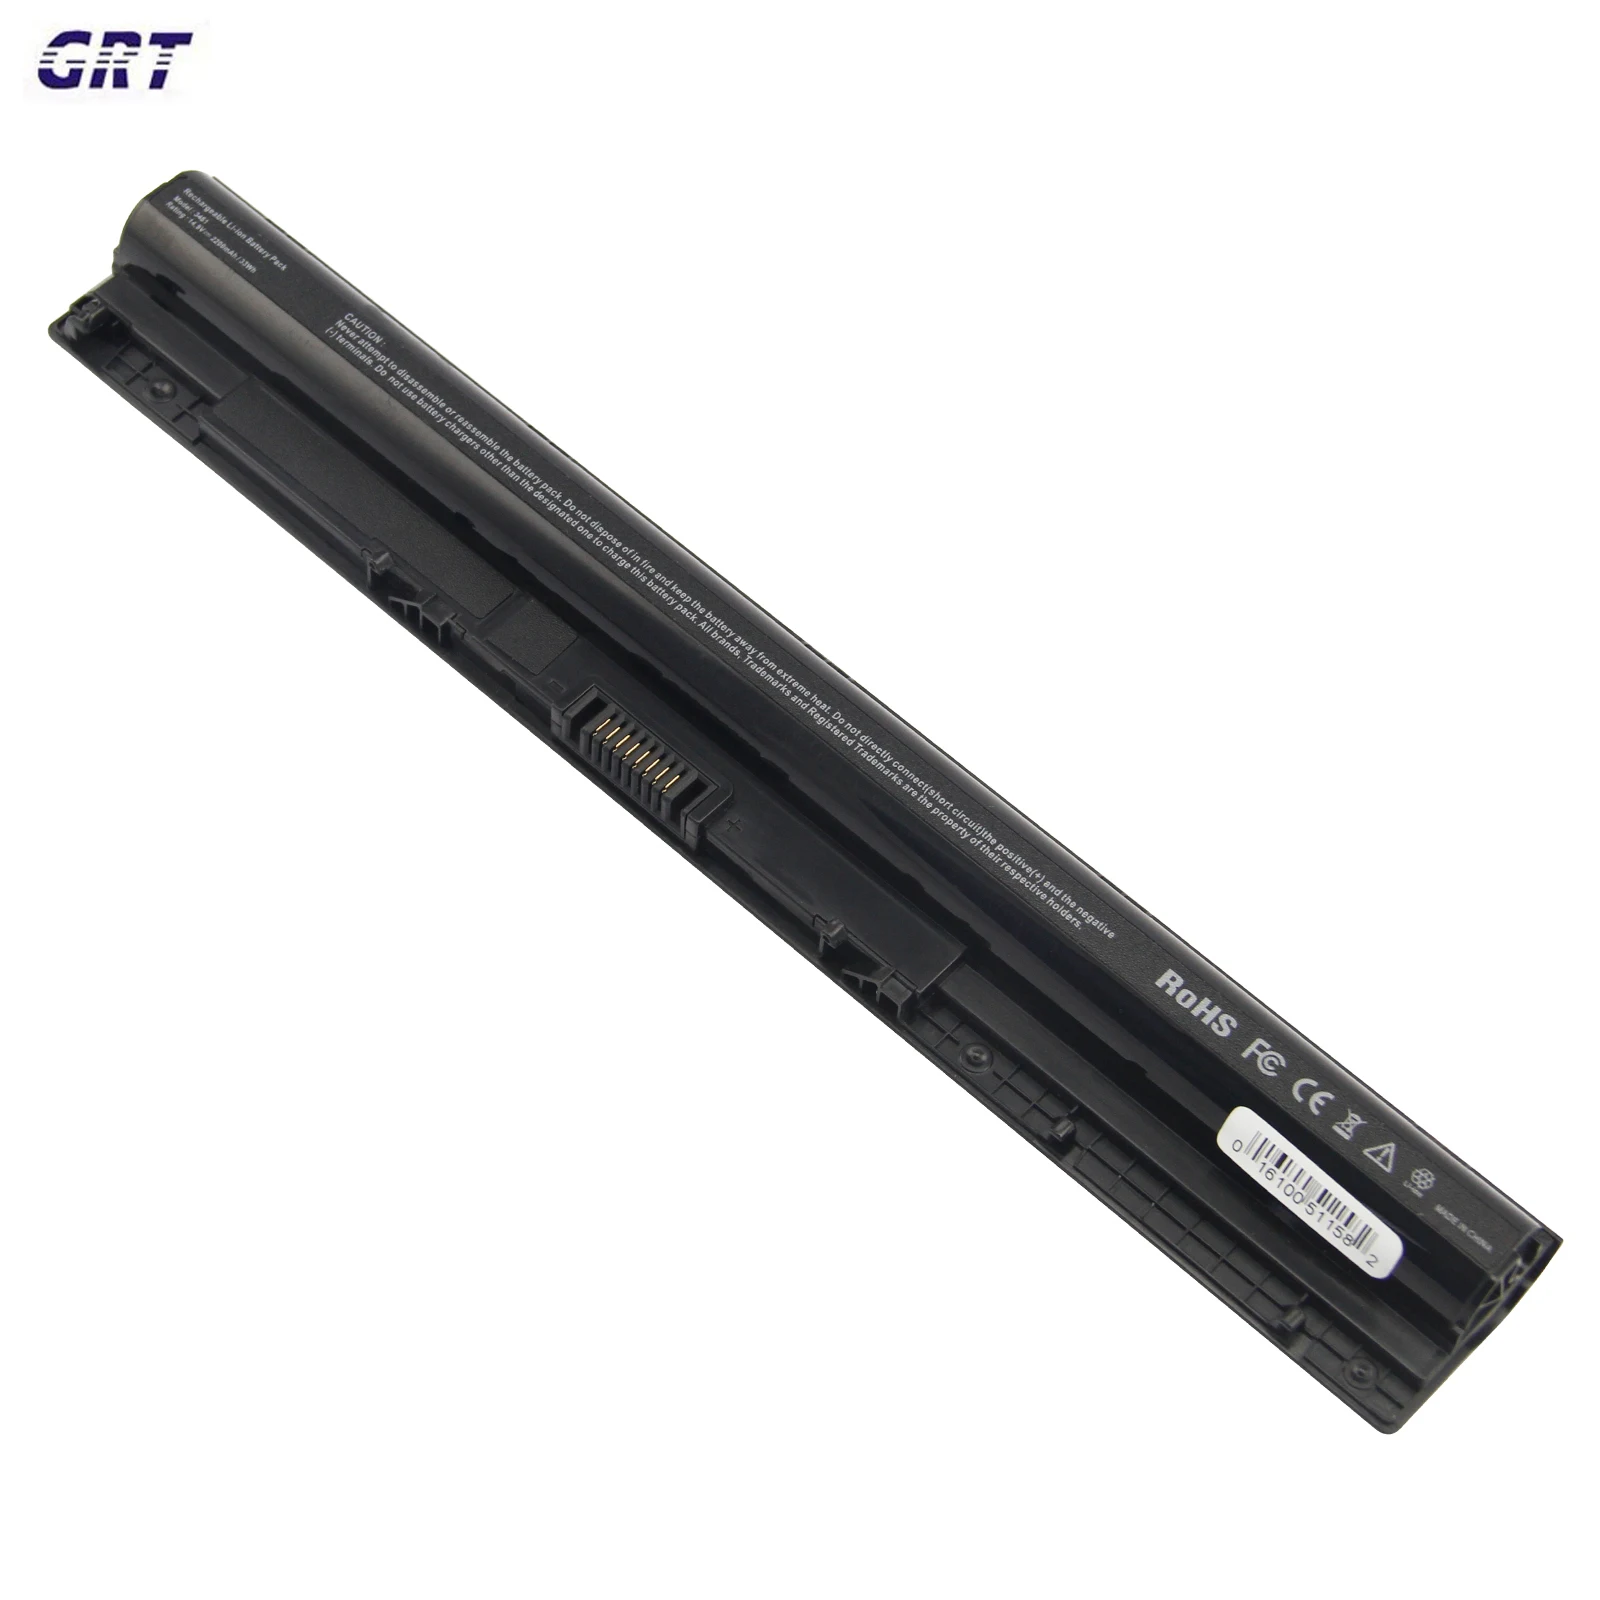 

wholesale 4cells laptop Battery for Dell Inspiron 3451 5451 5551 5555 5558 5559 5755 5758 M5Y1K